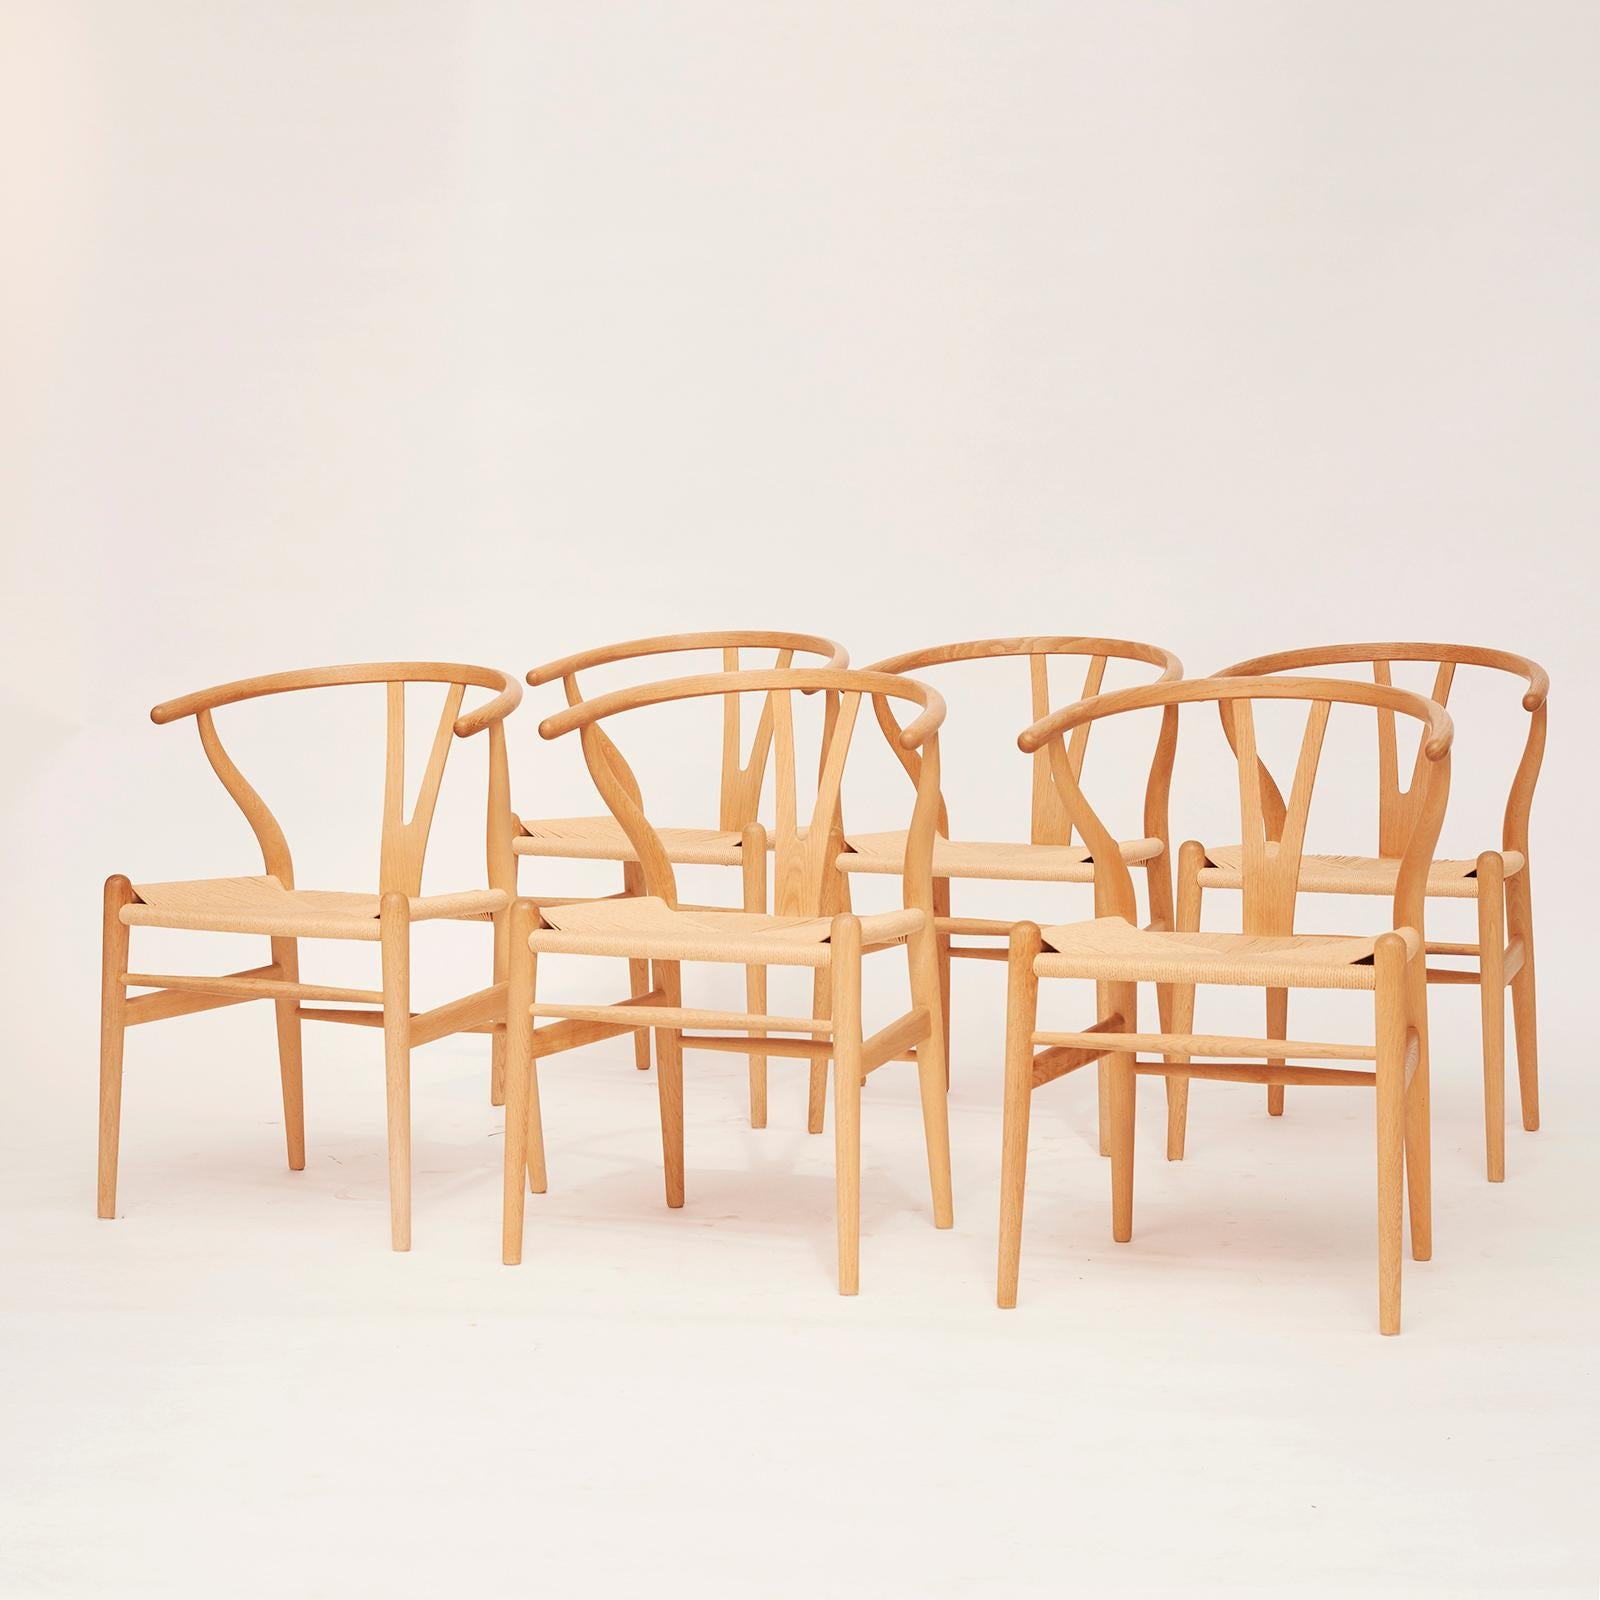 6 Hans J. Wegner CH24 Wishbone chairs, Y-chairs. Designed 1950, manufactured by Carl Rasmusen Oak / woven paper cord. As new 8 - 10 years old. Never used.